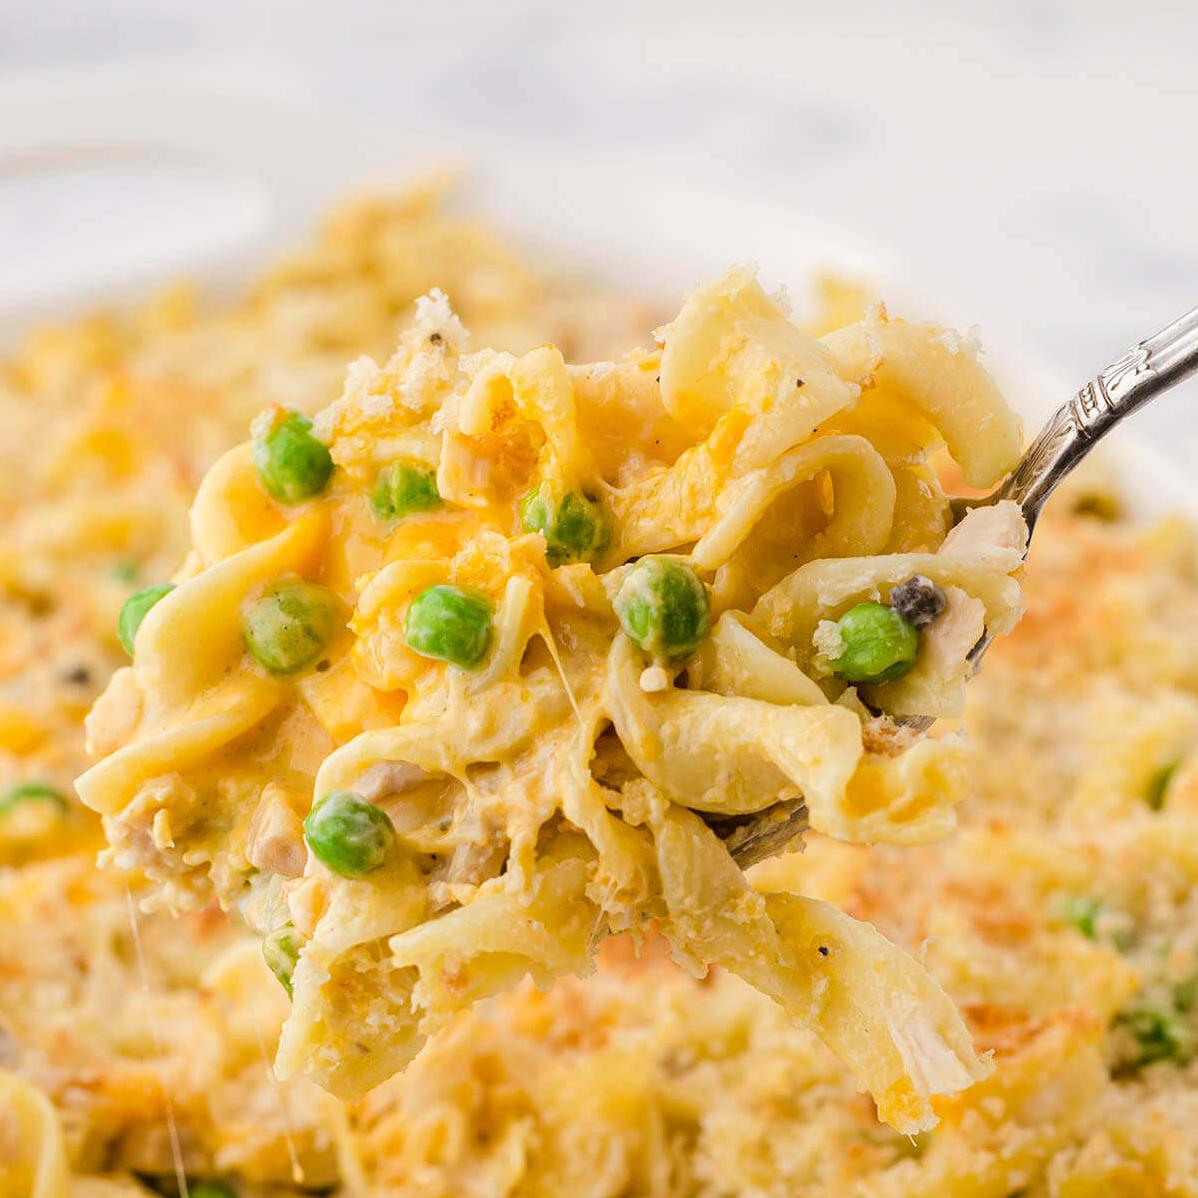  A perfect way to warm your soul and your body, this tuna casserole recipe is comfort food at its best.